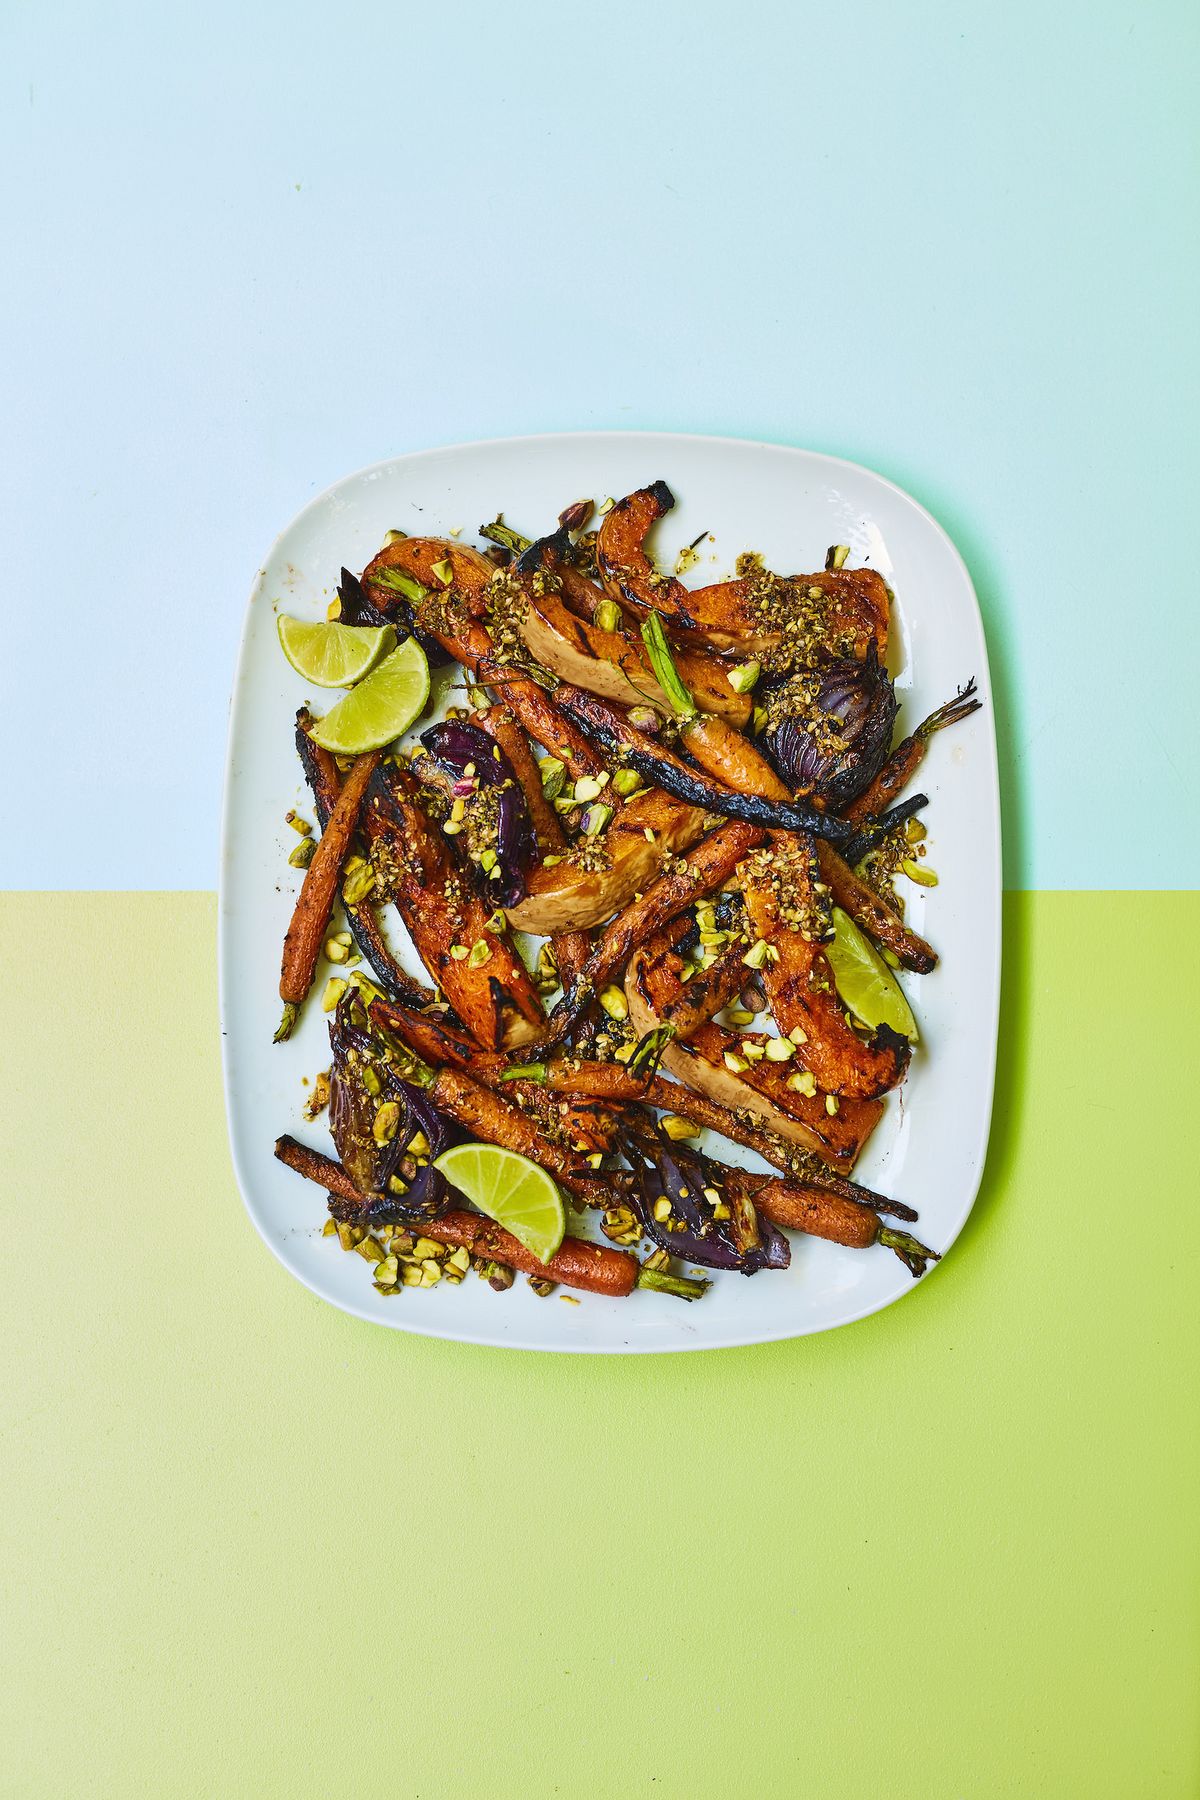 Squash with Charred Carrots, Red Onions, Coriander Seeds, Pistachios and Lime